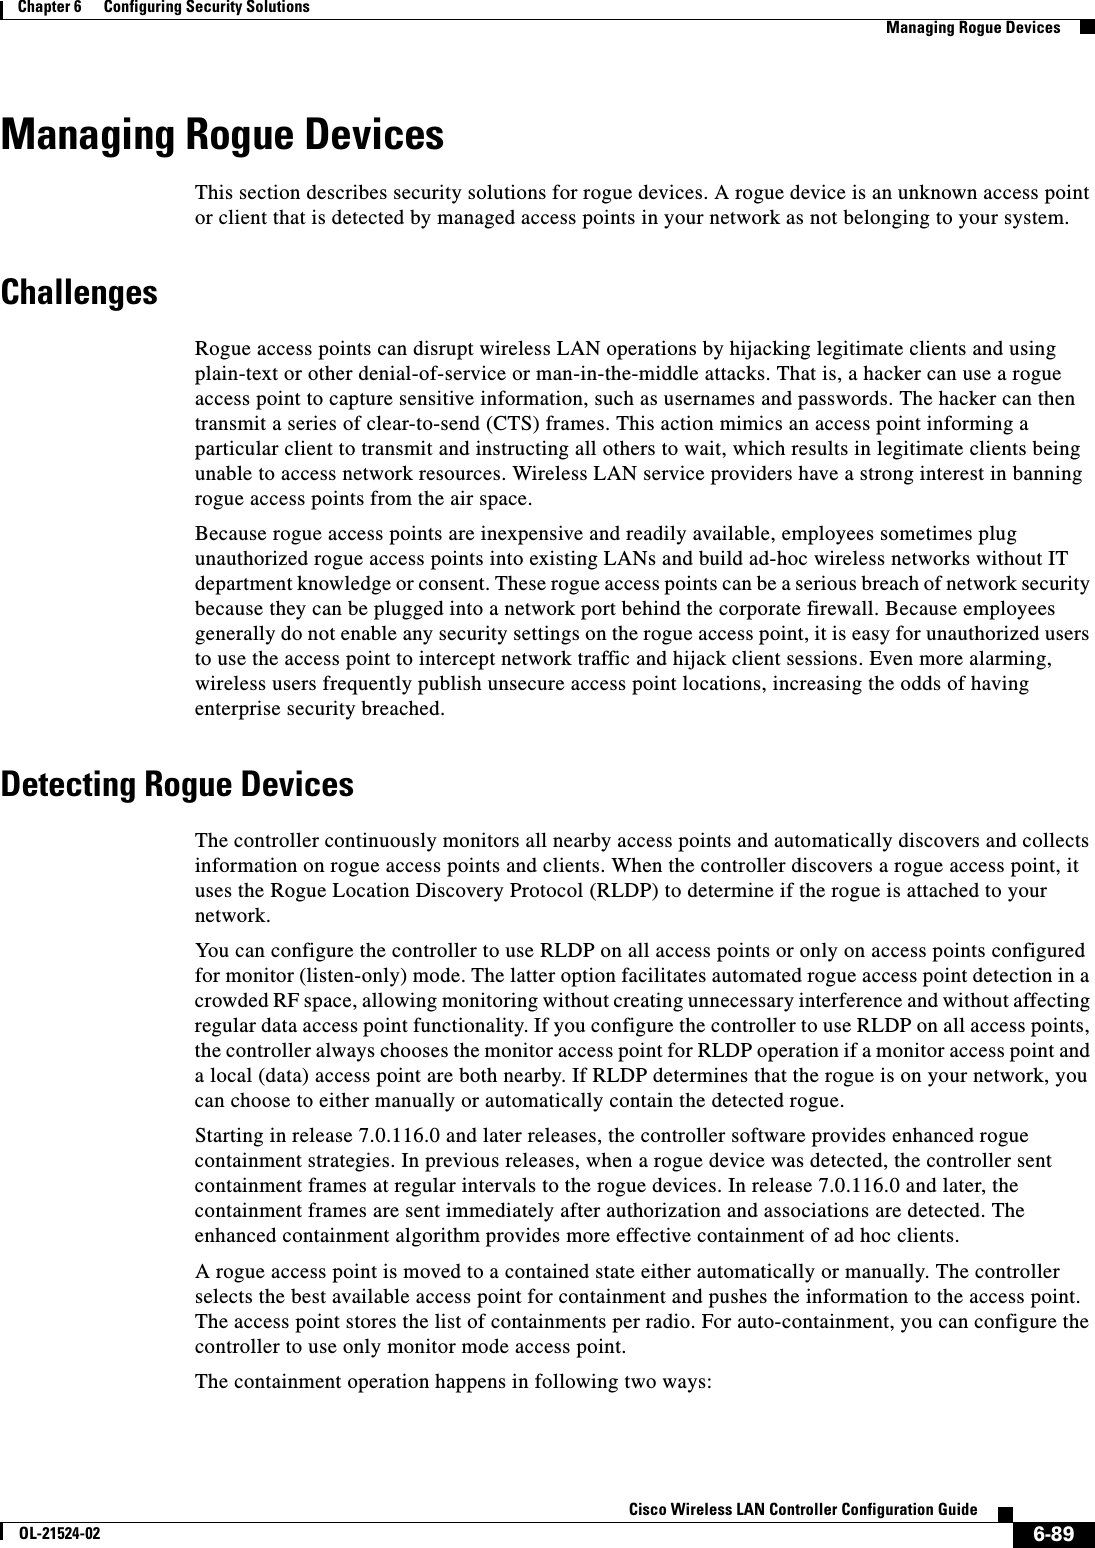  6-89Cisco Wireless LAN Controller Configuration GuideOL-21524-02Chapter 6      Configuring Security Solutions  Managing Rogue DevicesManaging Rogue DevicesThis section describes security solutions for rogue devices. A rogue device is an unknown access point or client that is detected by managed access points in your network as not belonging to your system.ChallengesRogue access points can disrupt wireless LAN operations by hijacking legitimate clients and using plain-text or other denial-of-service or man-in-the-middle attacks. That is, a hacker can use a rogue access point to capture sensitive information, such as usernames and passwords. The hacker can then transmit a series of clear-to-send (CTS) frames. This action mimics an access point informing a particular client to transmit and instructing all others to wait, which results in legitimate clients being unable to access network resources. Wireless LAN service providers have a strong interest in banning rogue access points from the air space.Because rogue access points are inexpensive and readily available, employees sometimes plug unauthorized rogue access points into existing LANs and build ad-hoc wireless networks without IT department knowledge or consent. These rogue access points can be a serious breach of network security because they can be plugged into a network port behind the corporate firewall. Because employees generally do not enable any security settings on the rogue access point, it is easy for unauthorized users to use the access point to intercept network traffic and hijack client sessions. Even more alarming, wireless users frequently publish unsecure access point locations, increasing the odds of having enterprise security breached. Detecting Rogue DevicesThe controller continuously monitors all nearby access points and automatically discovers and collects information on rogue access points and clients. When the controller discovers a rogue access point, it uses the Rogue Location Discovery Protocol (RLDP) to determine if the rogue is attached to your network.You can configure the controller to use RLDP on all access points or only on access points configured for monitor (listen-only) mode. The latter option facilitates automated rogue access point detection in a crowded RF space, allowing monitoring without creating unnecessary interference and without affecting regular data access point functionality. If you configure the controller to use RLDP on all access points, the controller always chooses the monitor access point for RLDP operation if a monitor access point and a local (data) access point are both nearby. If RLDP determines that the rogue is on your network, you can choose to either manually or automatically contain the detected rogue.Starting in release 7.0.116.0 and later releases, the controller software provides enhanced rogue containment strategies. In previous releases, when a rogue device was detected, the controller sent containment frames at regular intervals to the rogue devices. In release 7.0.116.0 and later, the containment frames are sent immediately after authorization and associations are detected. The enhanced containment algorithm provides more effective containment of ad hoc clients.A rogue access point is moved to a contained state either automatically or manually. The controller selects the best available access point for containment and pushes the information to the access point. The access point stores the list of containments per radio. For auto-containment, you can configure the controller to use only monitor mode access point. The containment operation happens in following two ways: